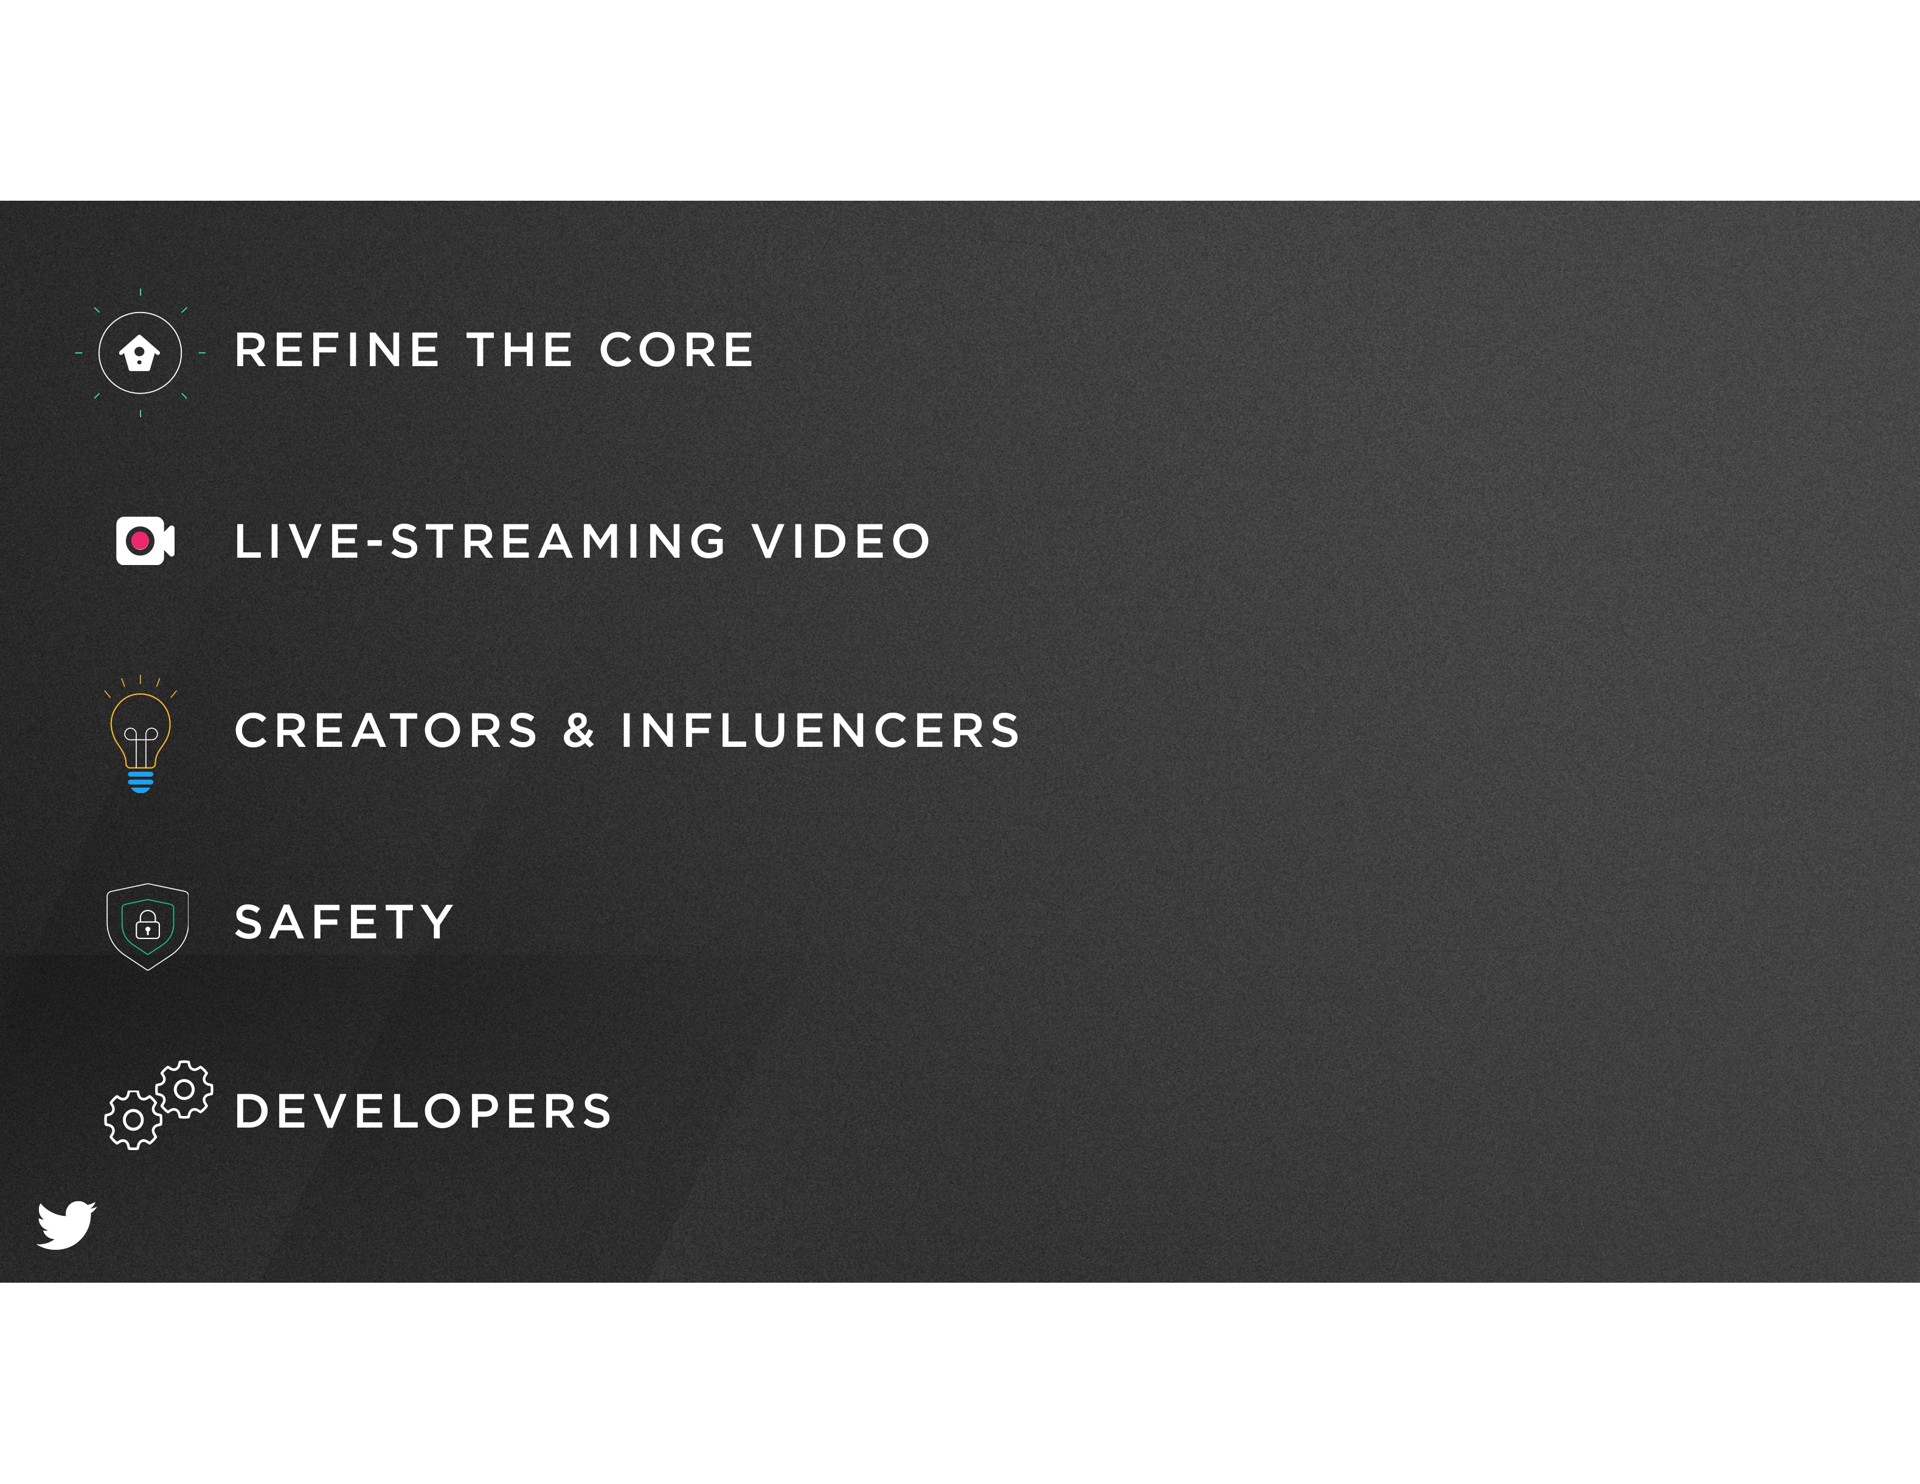 refine the core live streaming video creators safety developers i | Twitter